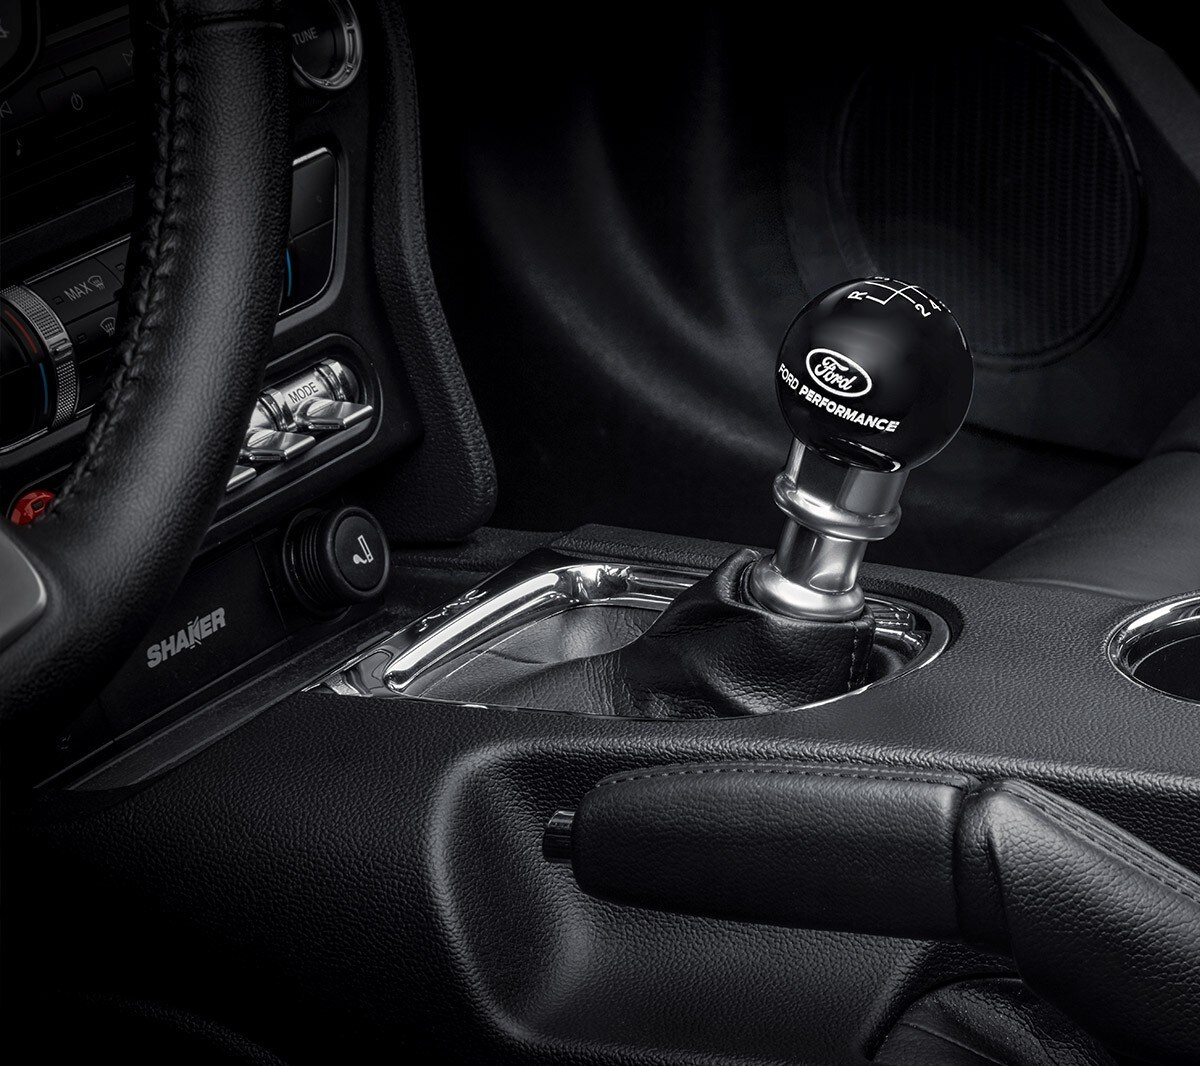 Ford Mustang GT gear shift knob close up